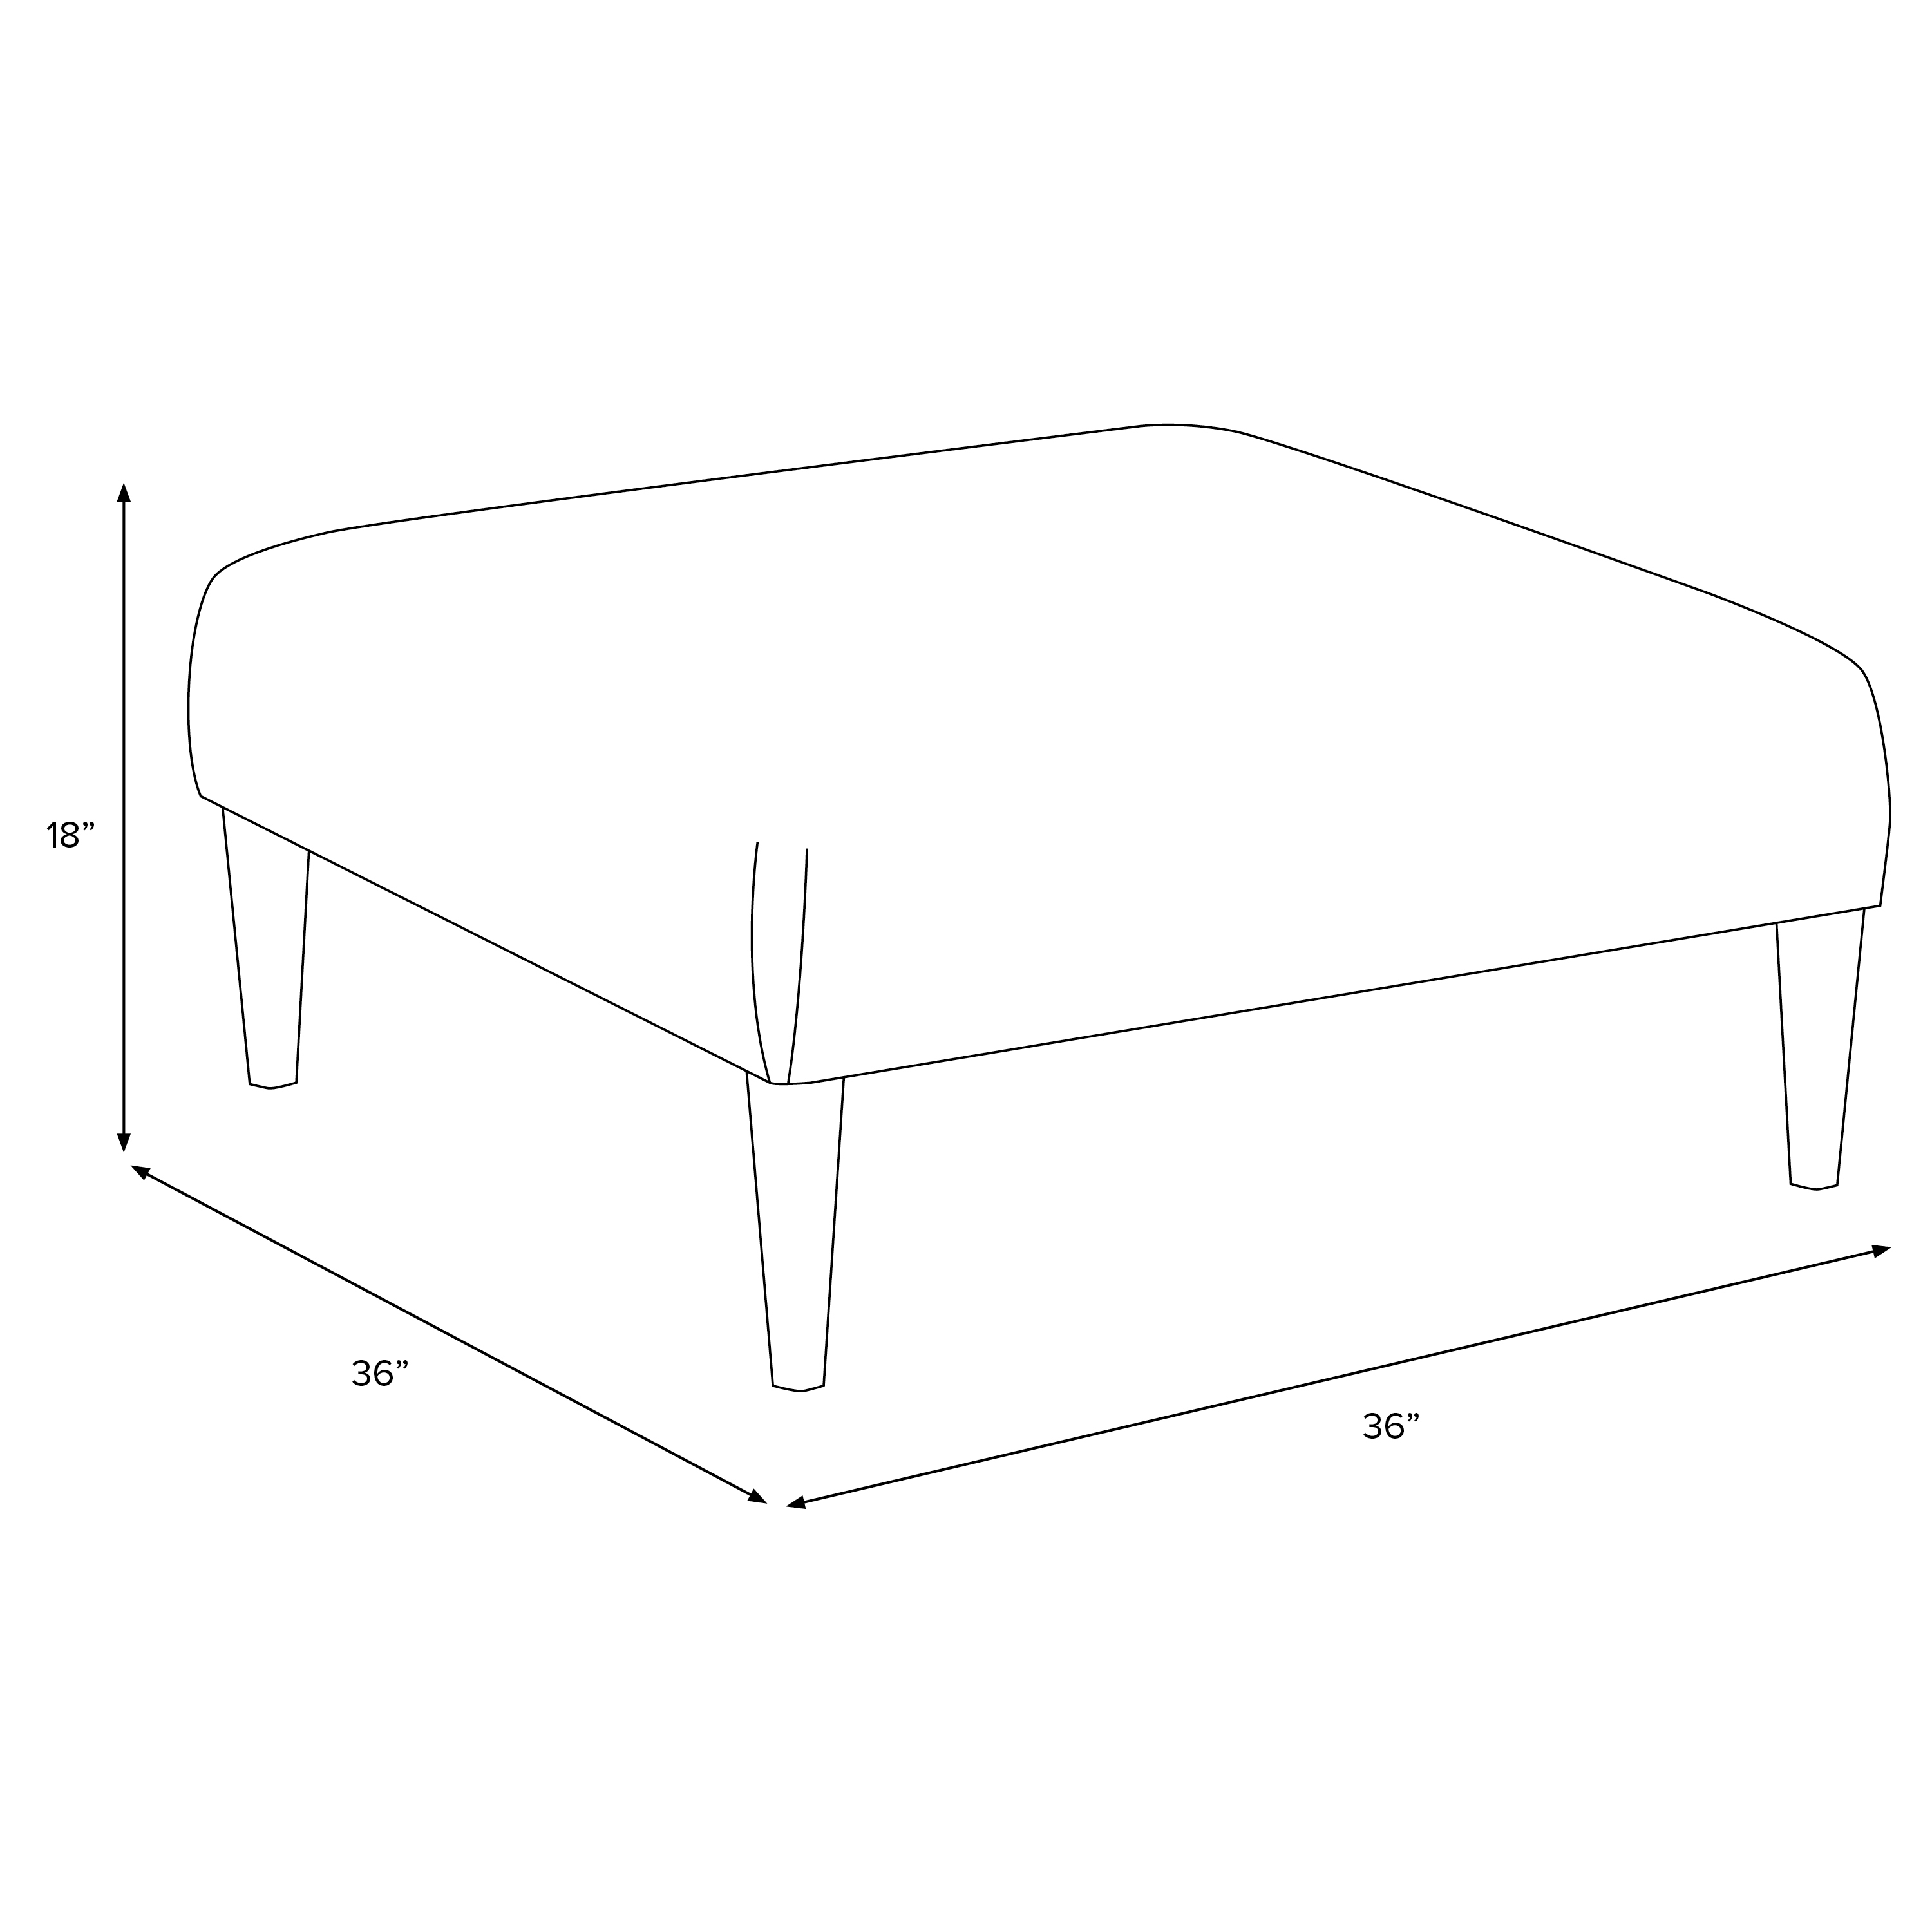 Algren Cocktail Ottoman with Turned Legs - Image 4